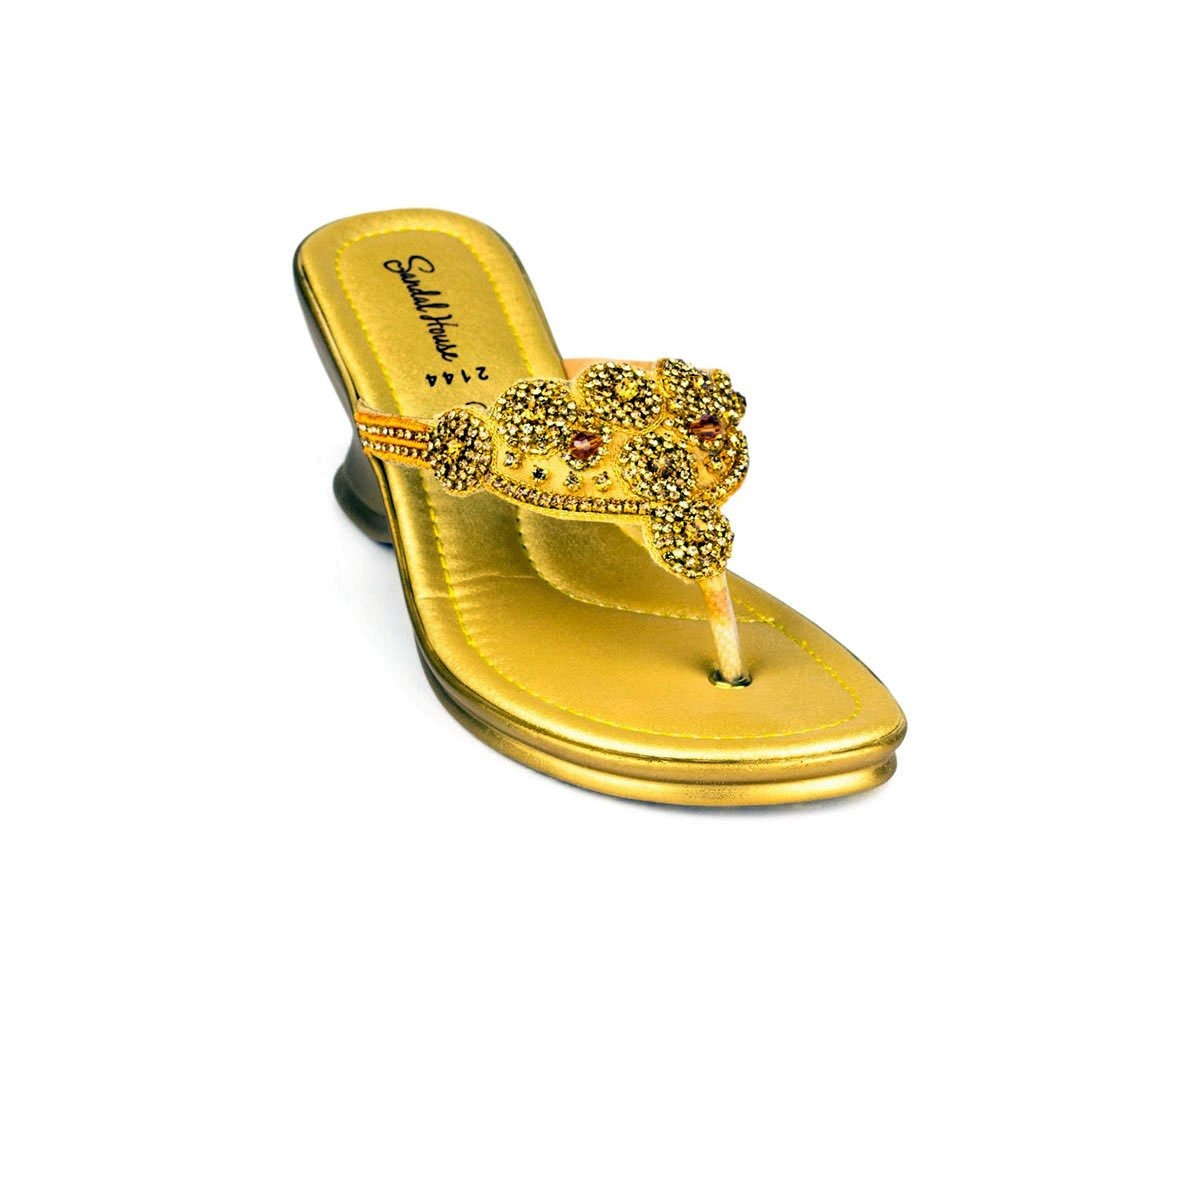 Womens Gold Diamante Toe Post Wedge Sandal - Watney Shoes 